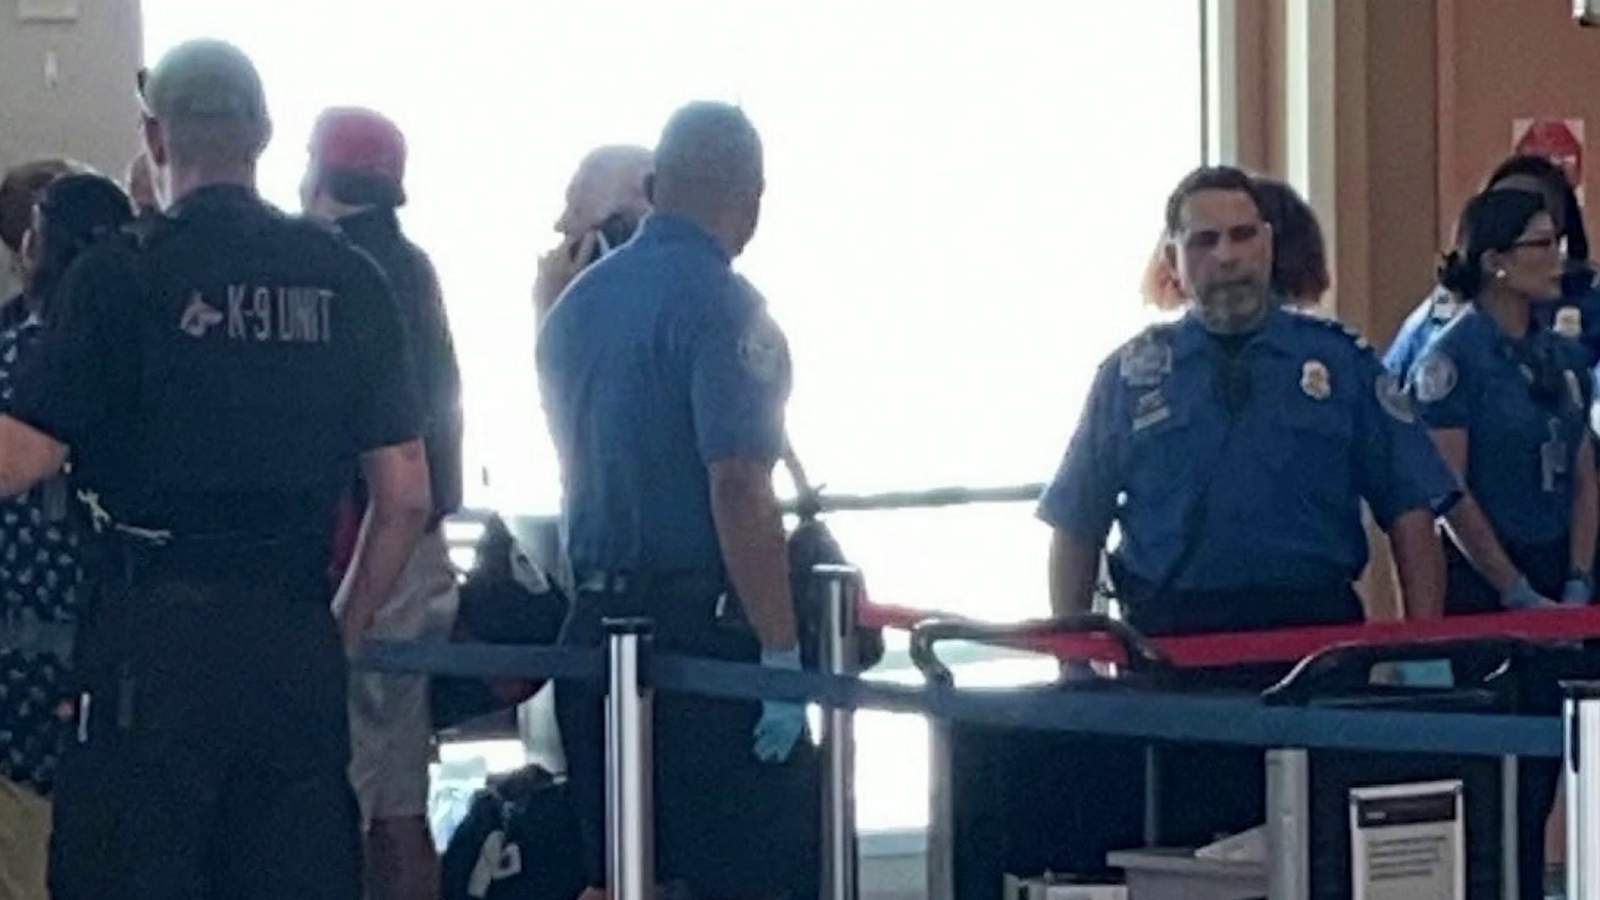 Report details how woman without ticket boarded Delta flight at Orlando airport